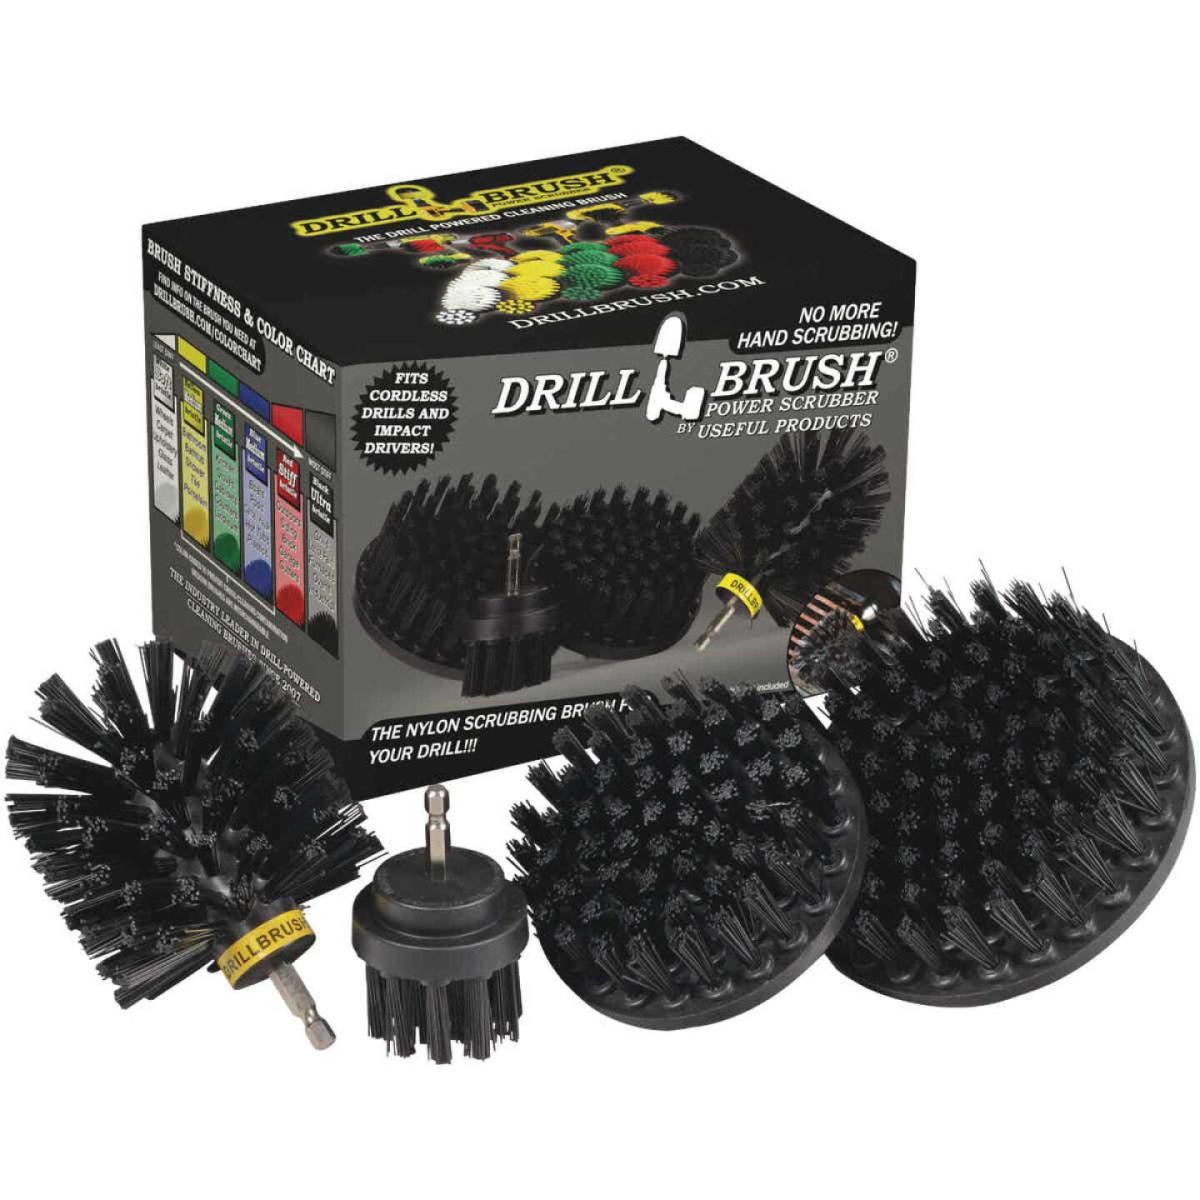 Drill Powered Attachment Safe Grill Brush Kit - Clean BBQ Grills - Wood Stoves - Outdoor Fireplace by Drillbrush